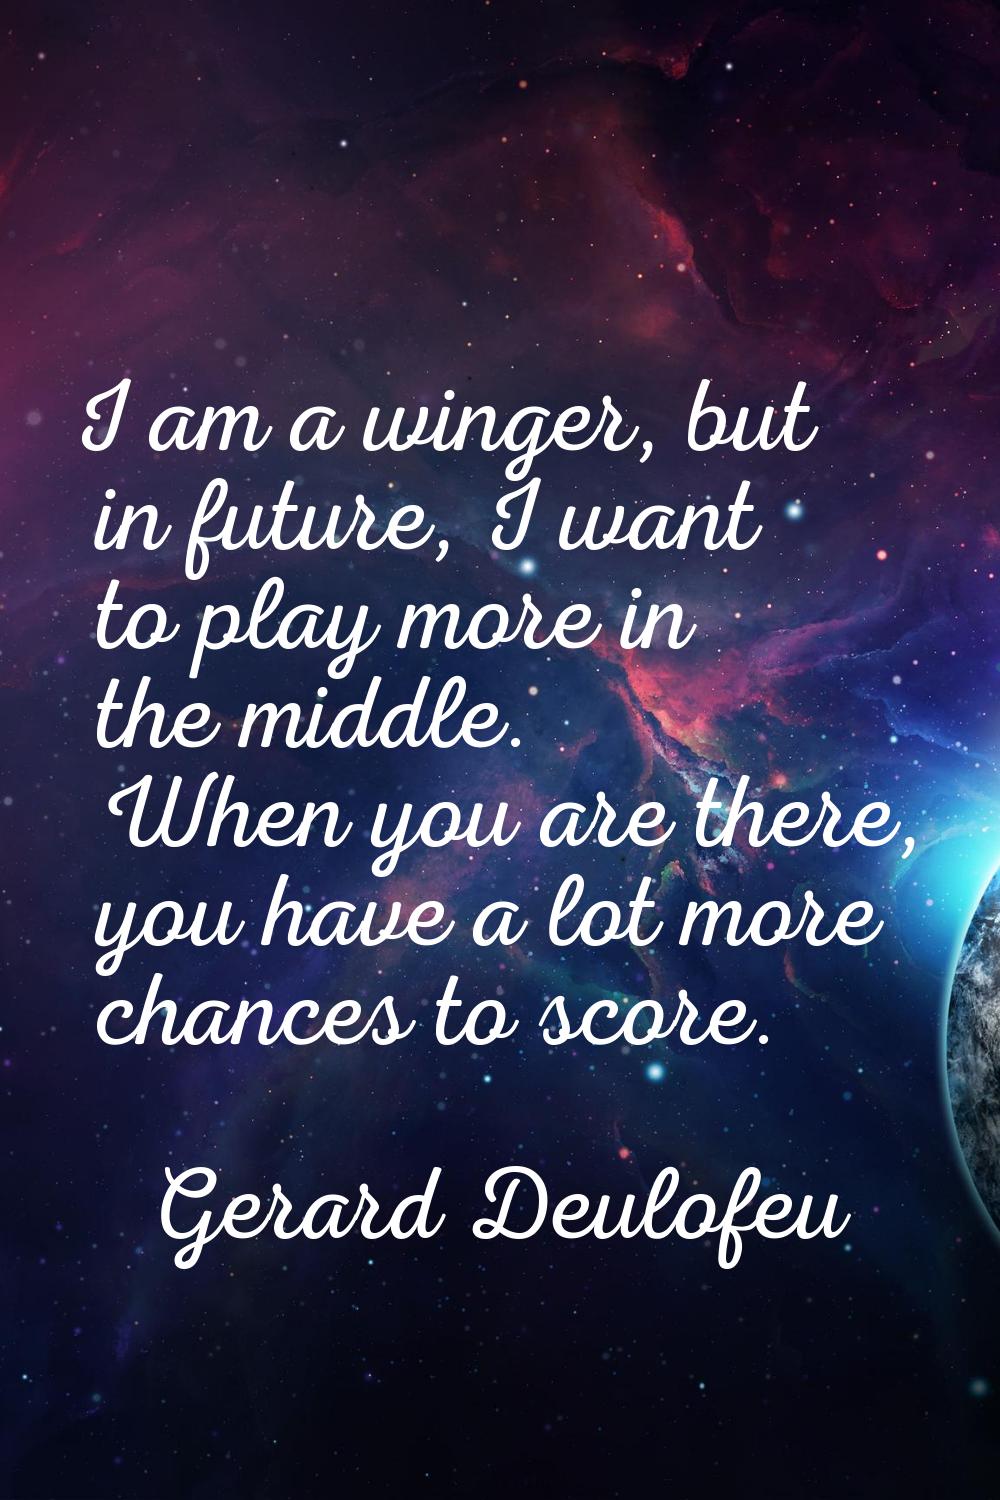 I am a winger, but in future, I want to play more in the middle. When you are there, you have a lot